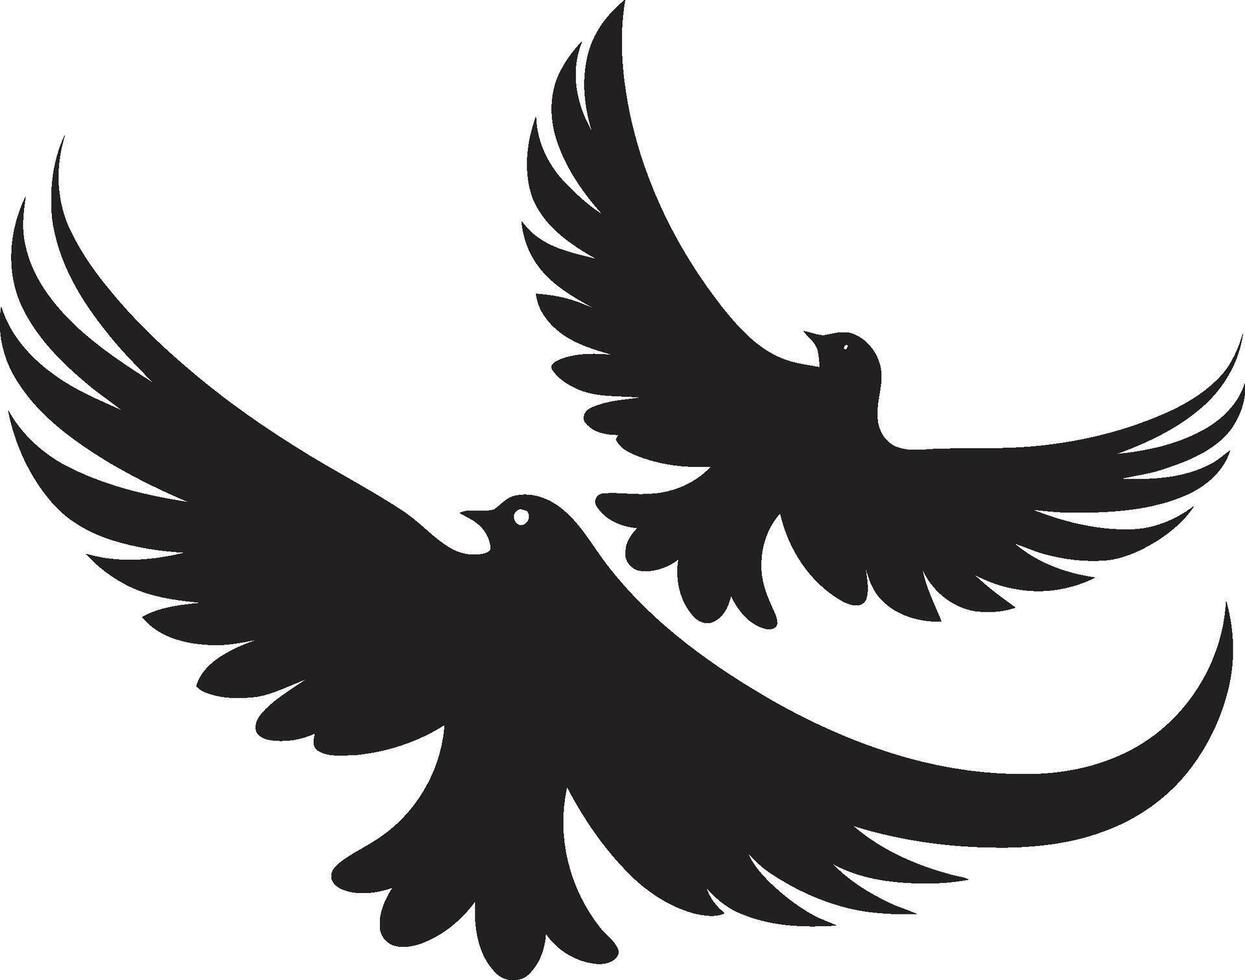 Wings of Unity of a Dove Pair Symbolic Serenity Dove Pair Element vector